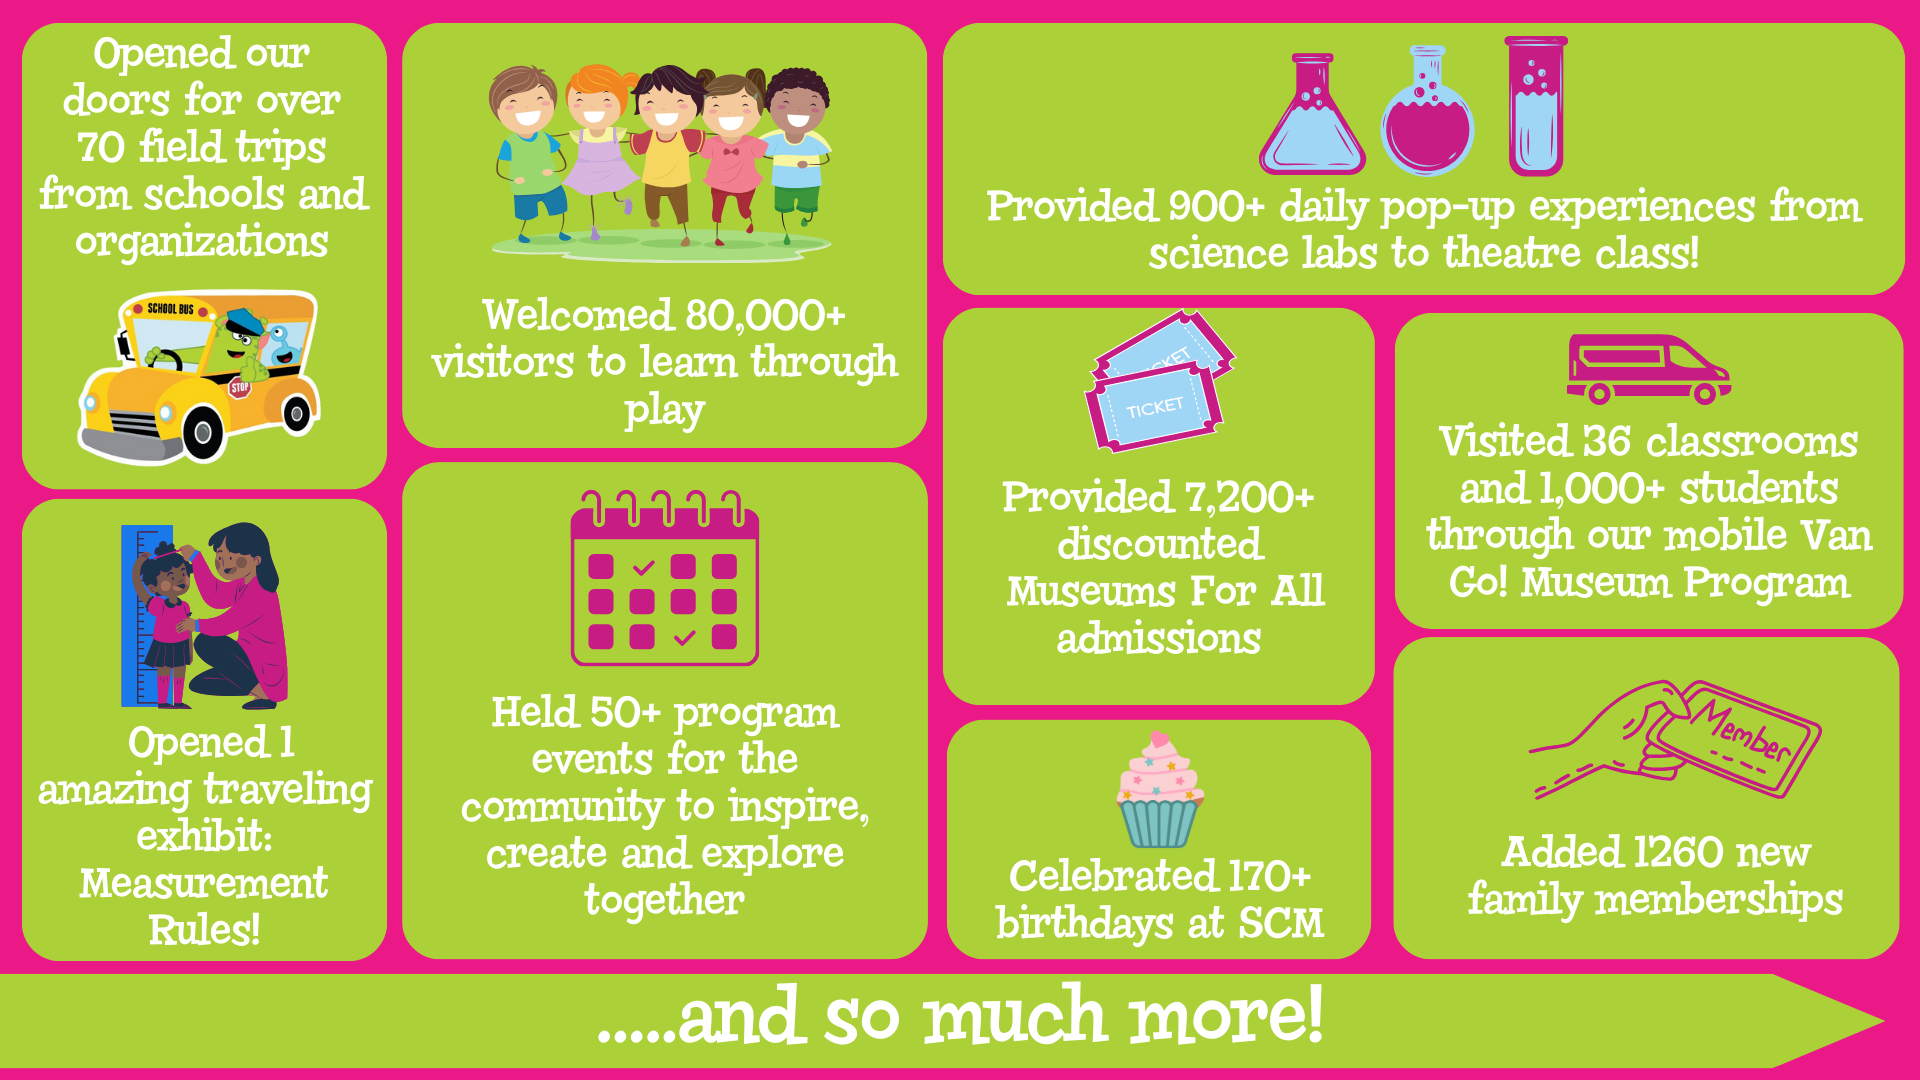 A pink and green infographic showing 9 statistics about the Sacramento Children's Museum